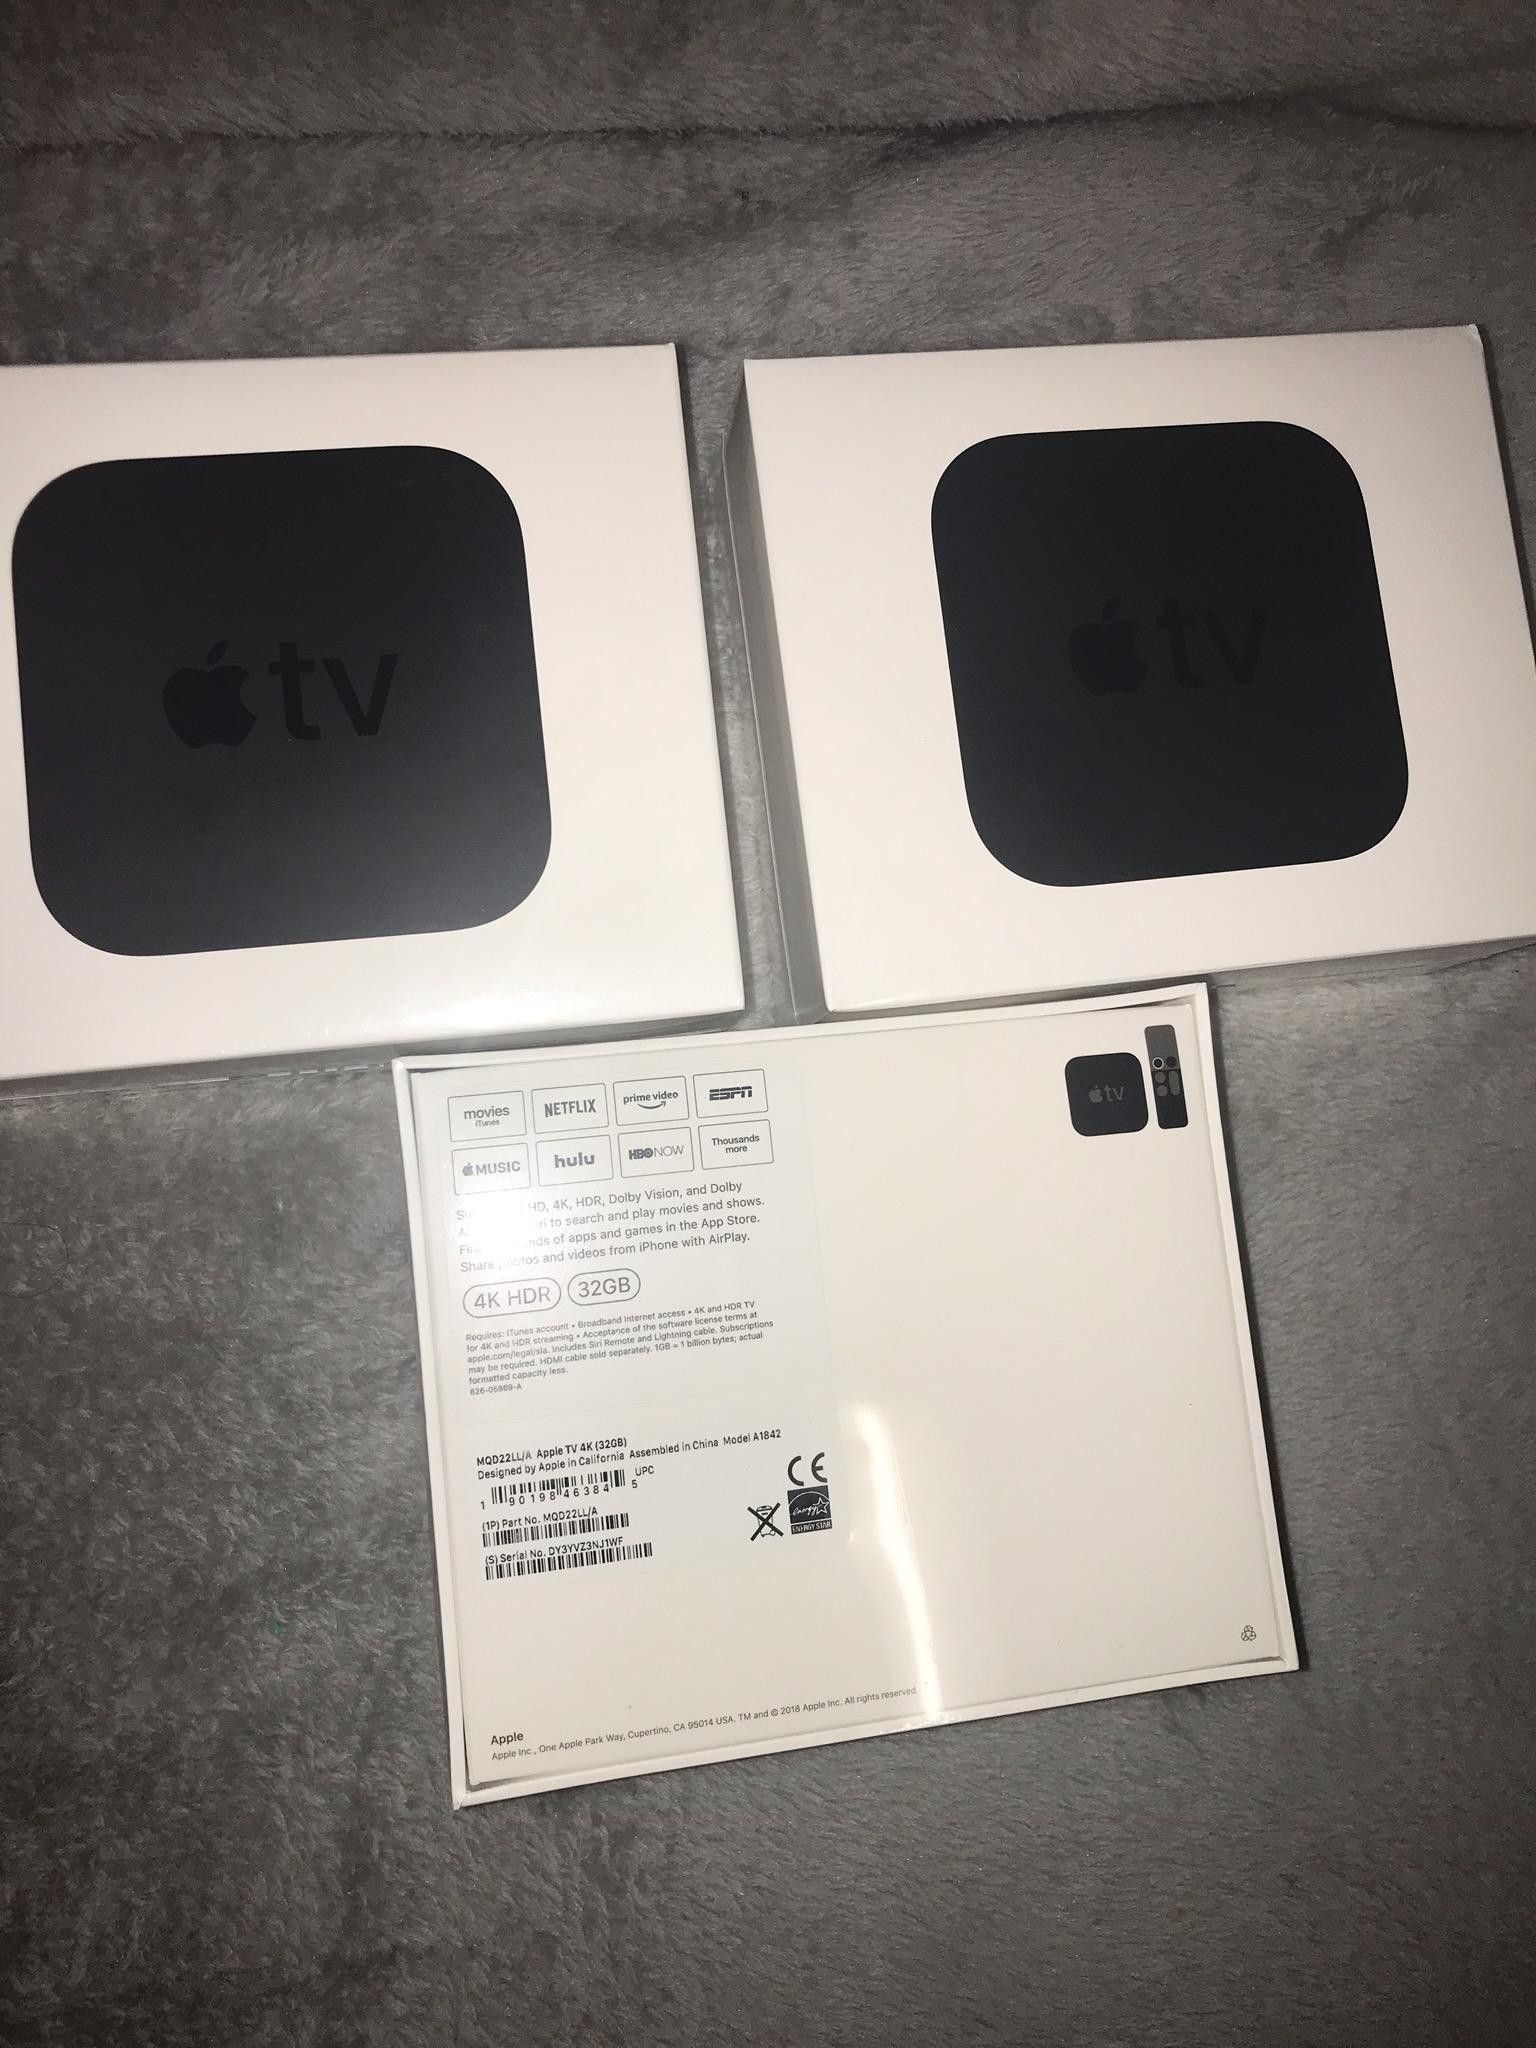 Apple tv 32gb 3 available and price is for each one sold separately